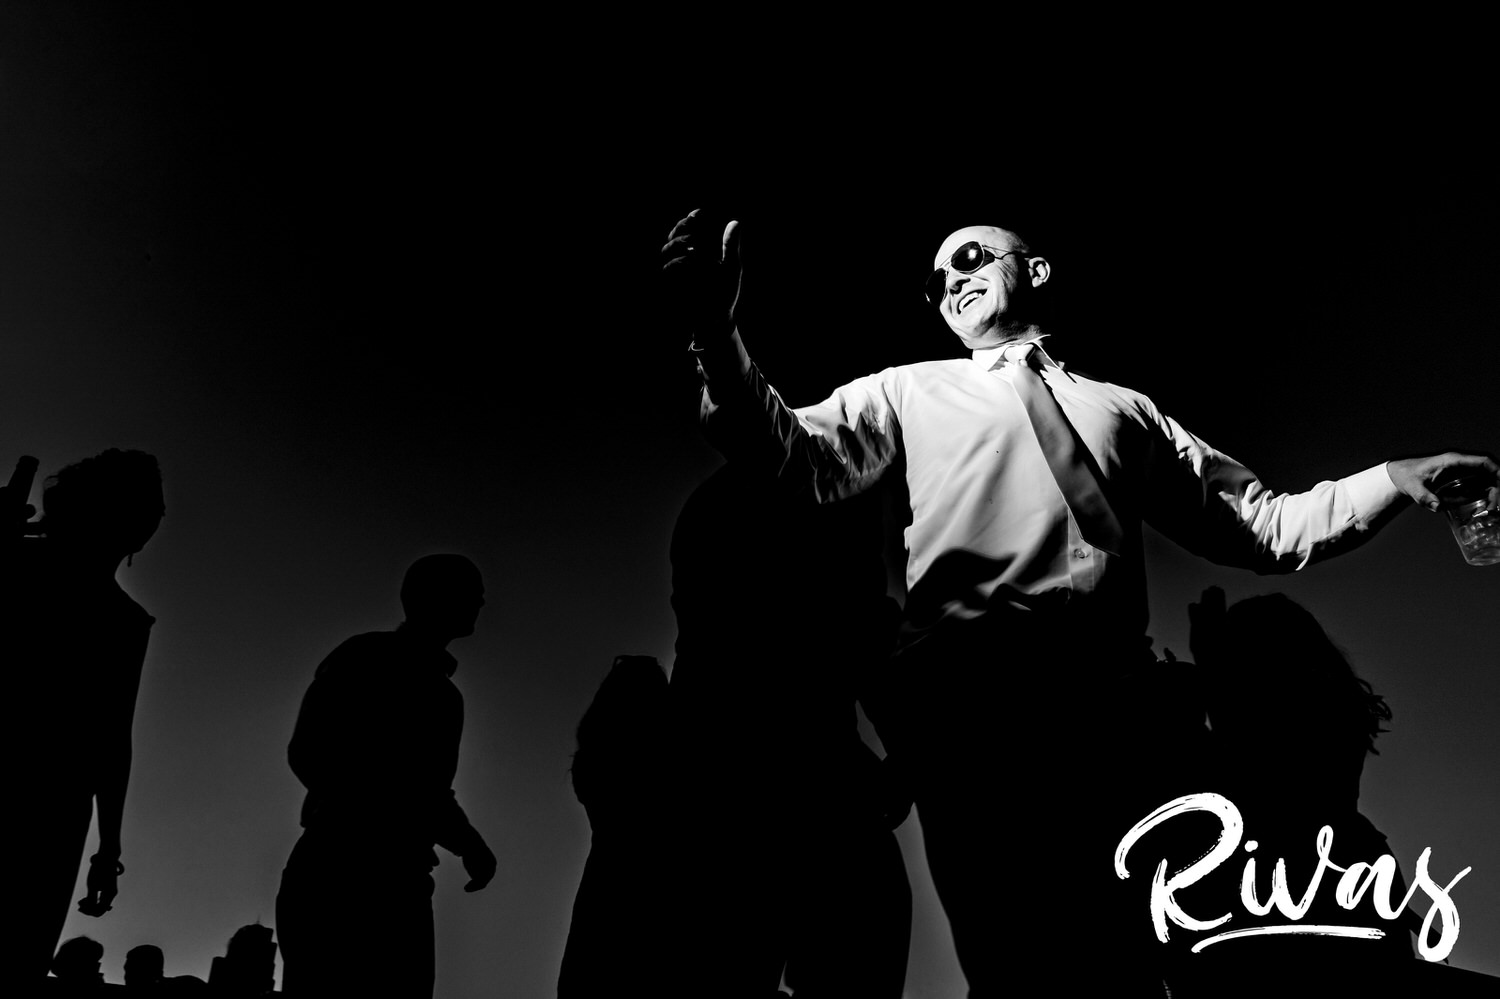 A candid black and white picture of a bald man in sunglasses dancing during a wedding reception, with the silhouettes of fellow dancers visible behind him during a wedding reception in Kansas City. 